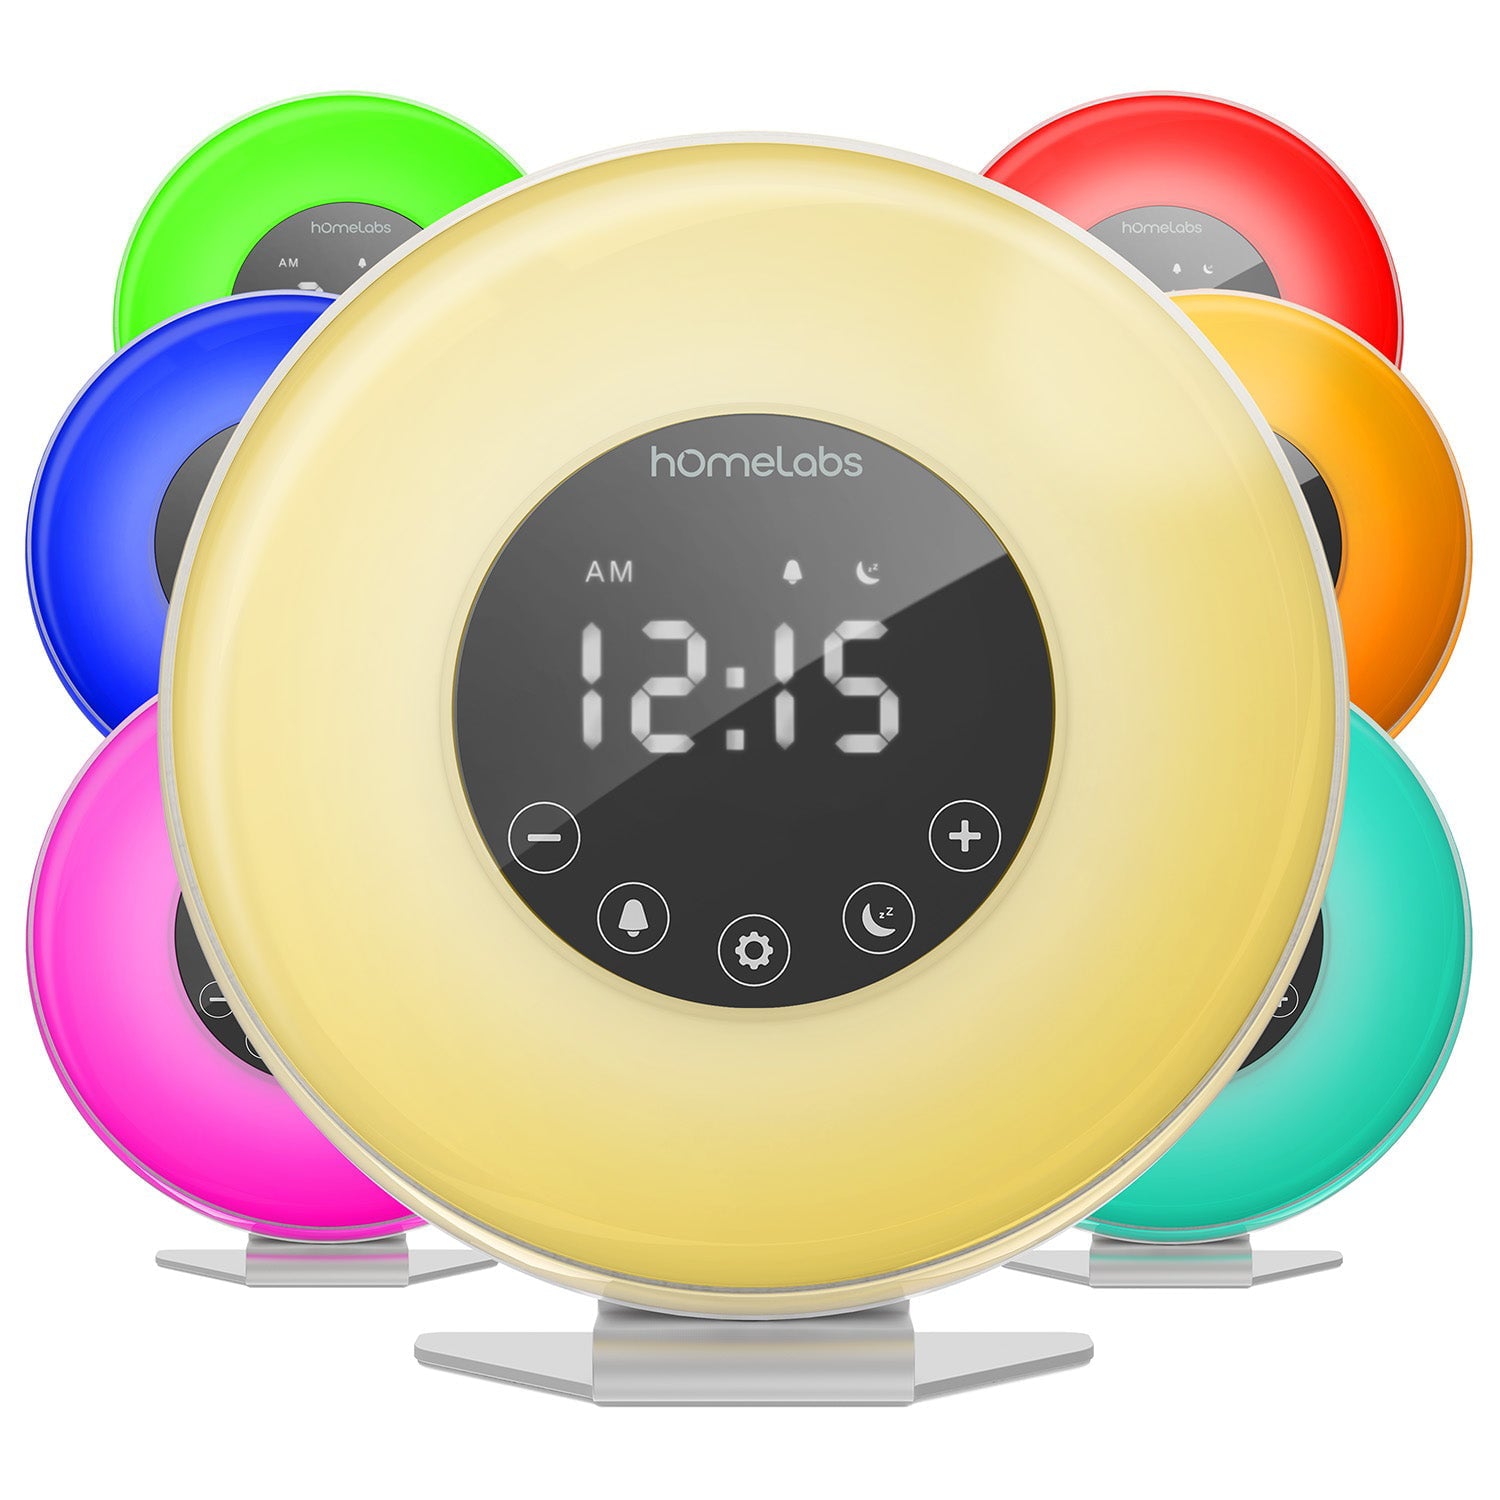 hOmeLabs Sunrise Alarm Clock - Digital LED Clock with 8 Color Light Options and FM Radio for Bedrooms - Multiple Nature Sounds Sunset Simulation & Touch Control - with Snooze Function for Heavy Sleepers, 2 Pack